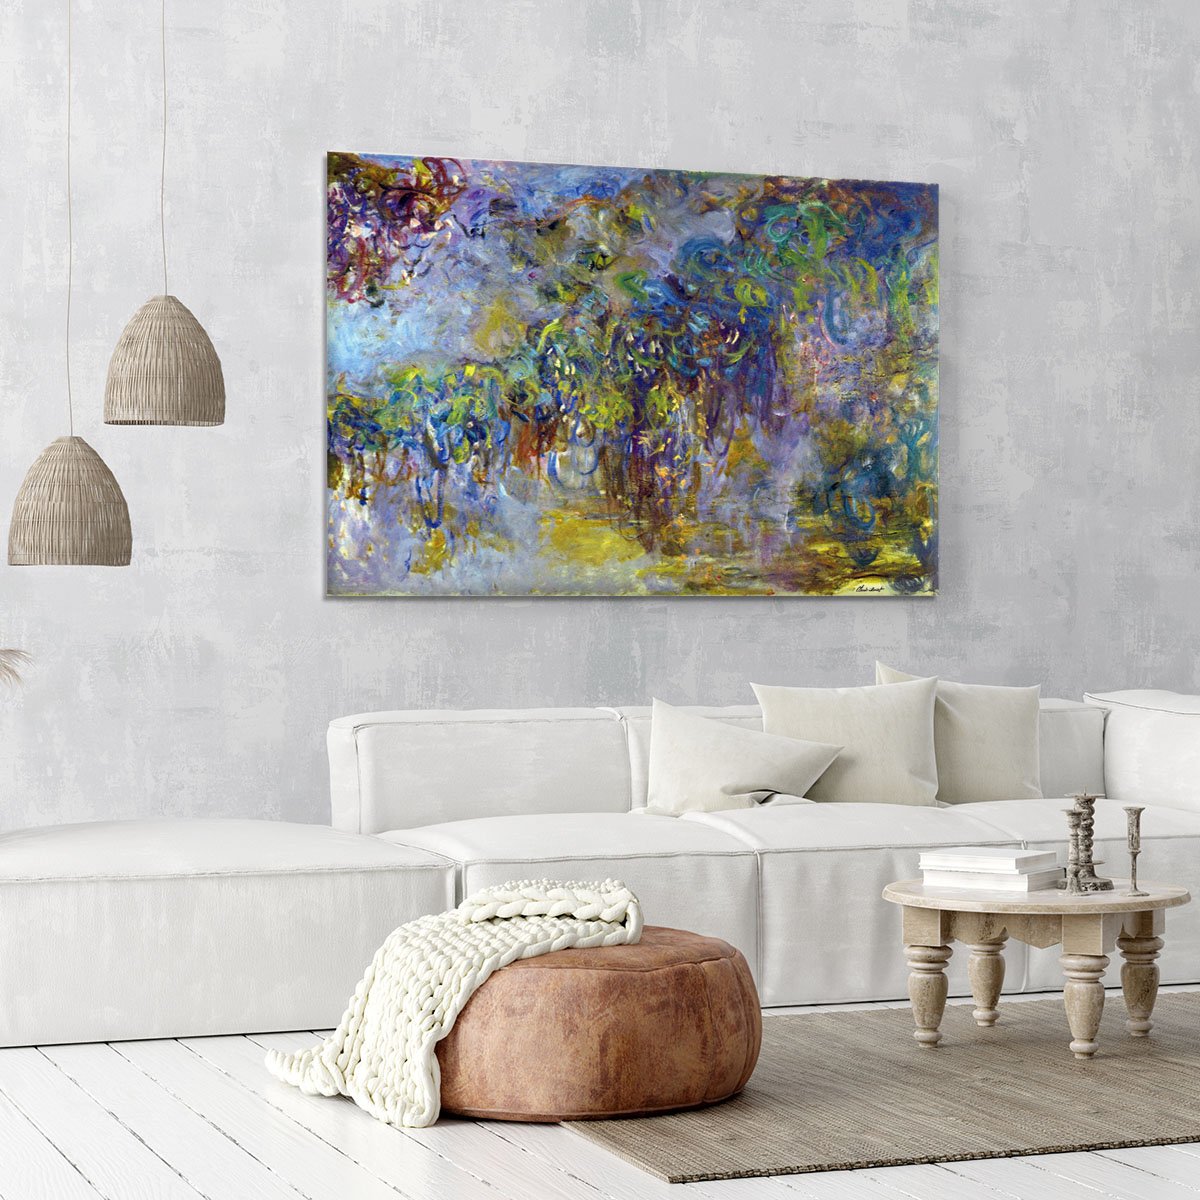 Wisteria 2 by Monet Canvas Print or Poster